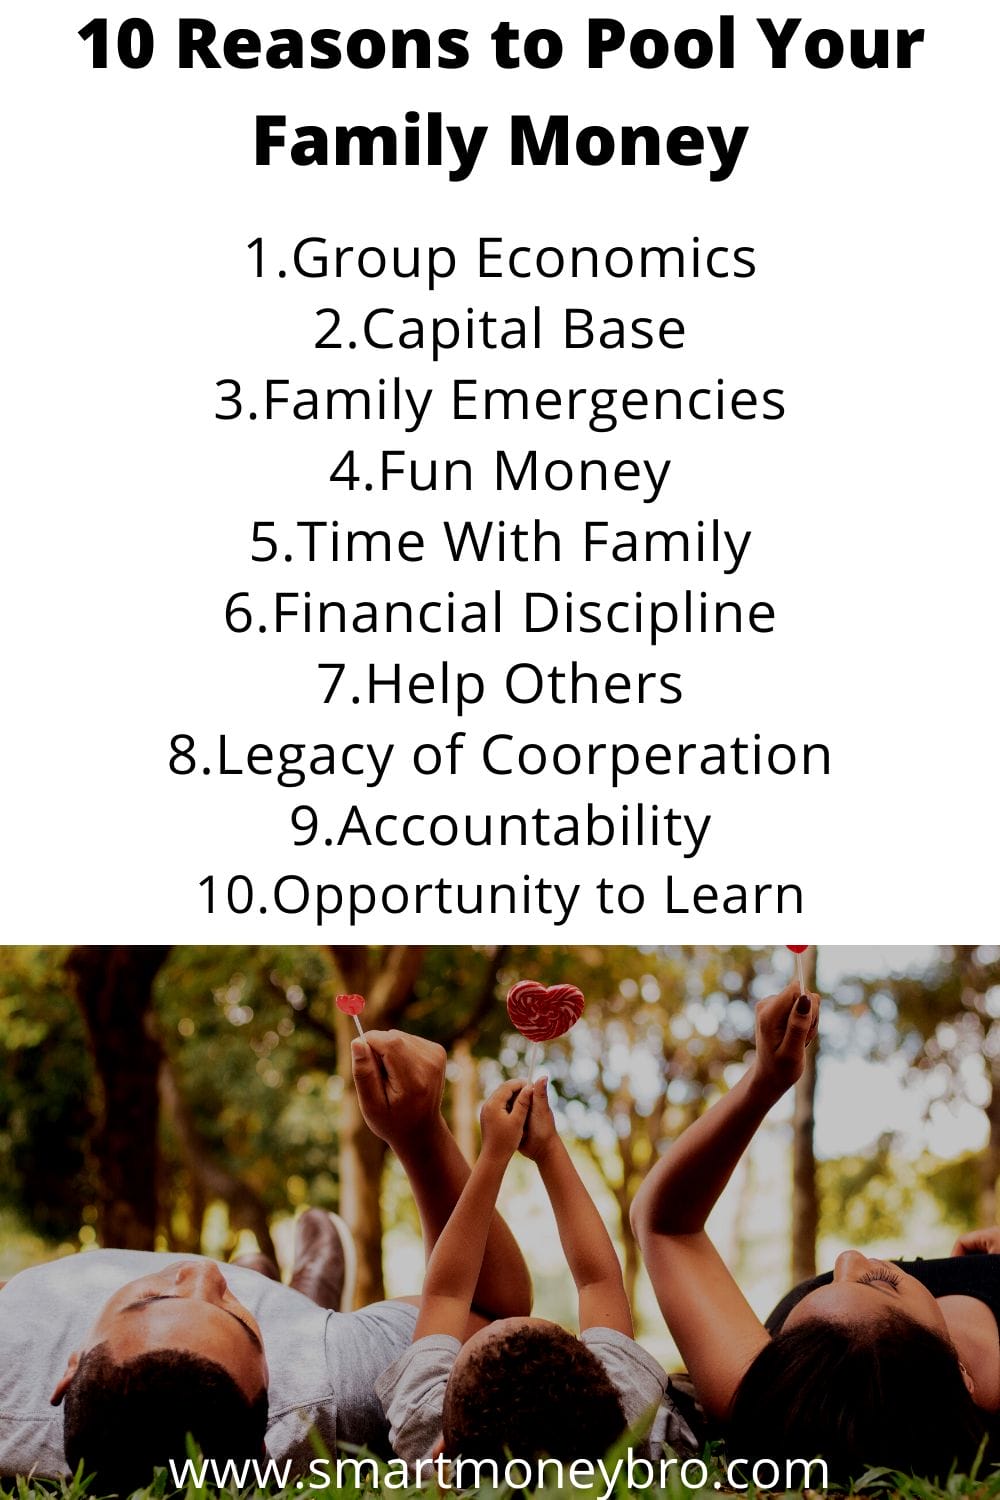 10 Reasons to Pool Your Family Money with family laying in grass outside looking up. smart money bro